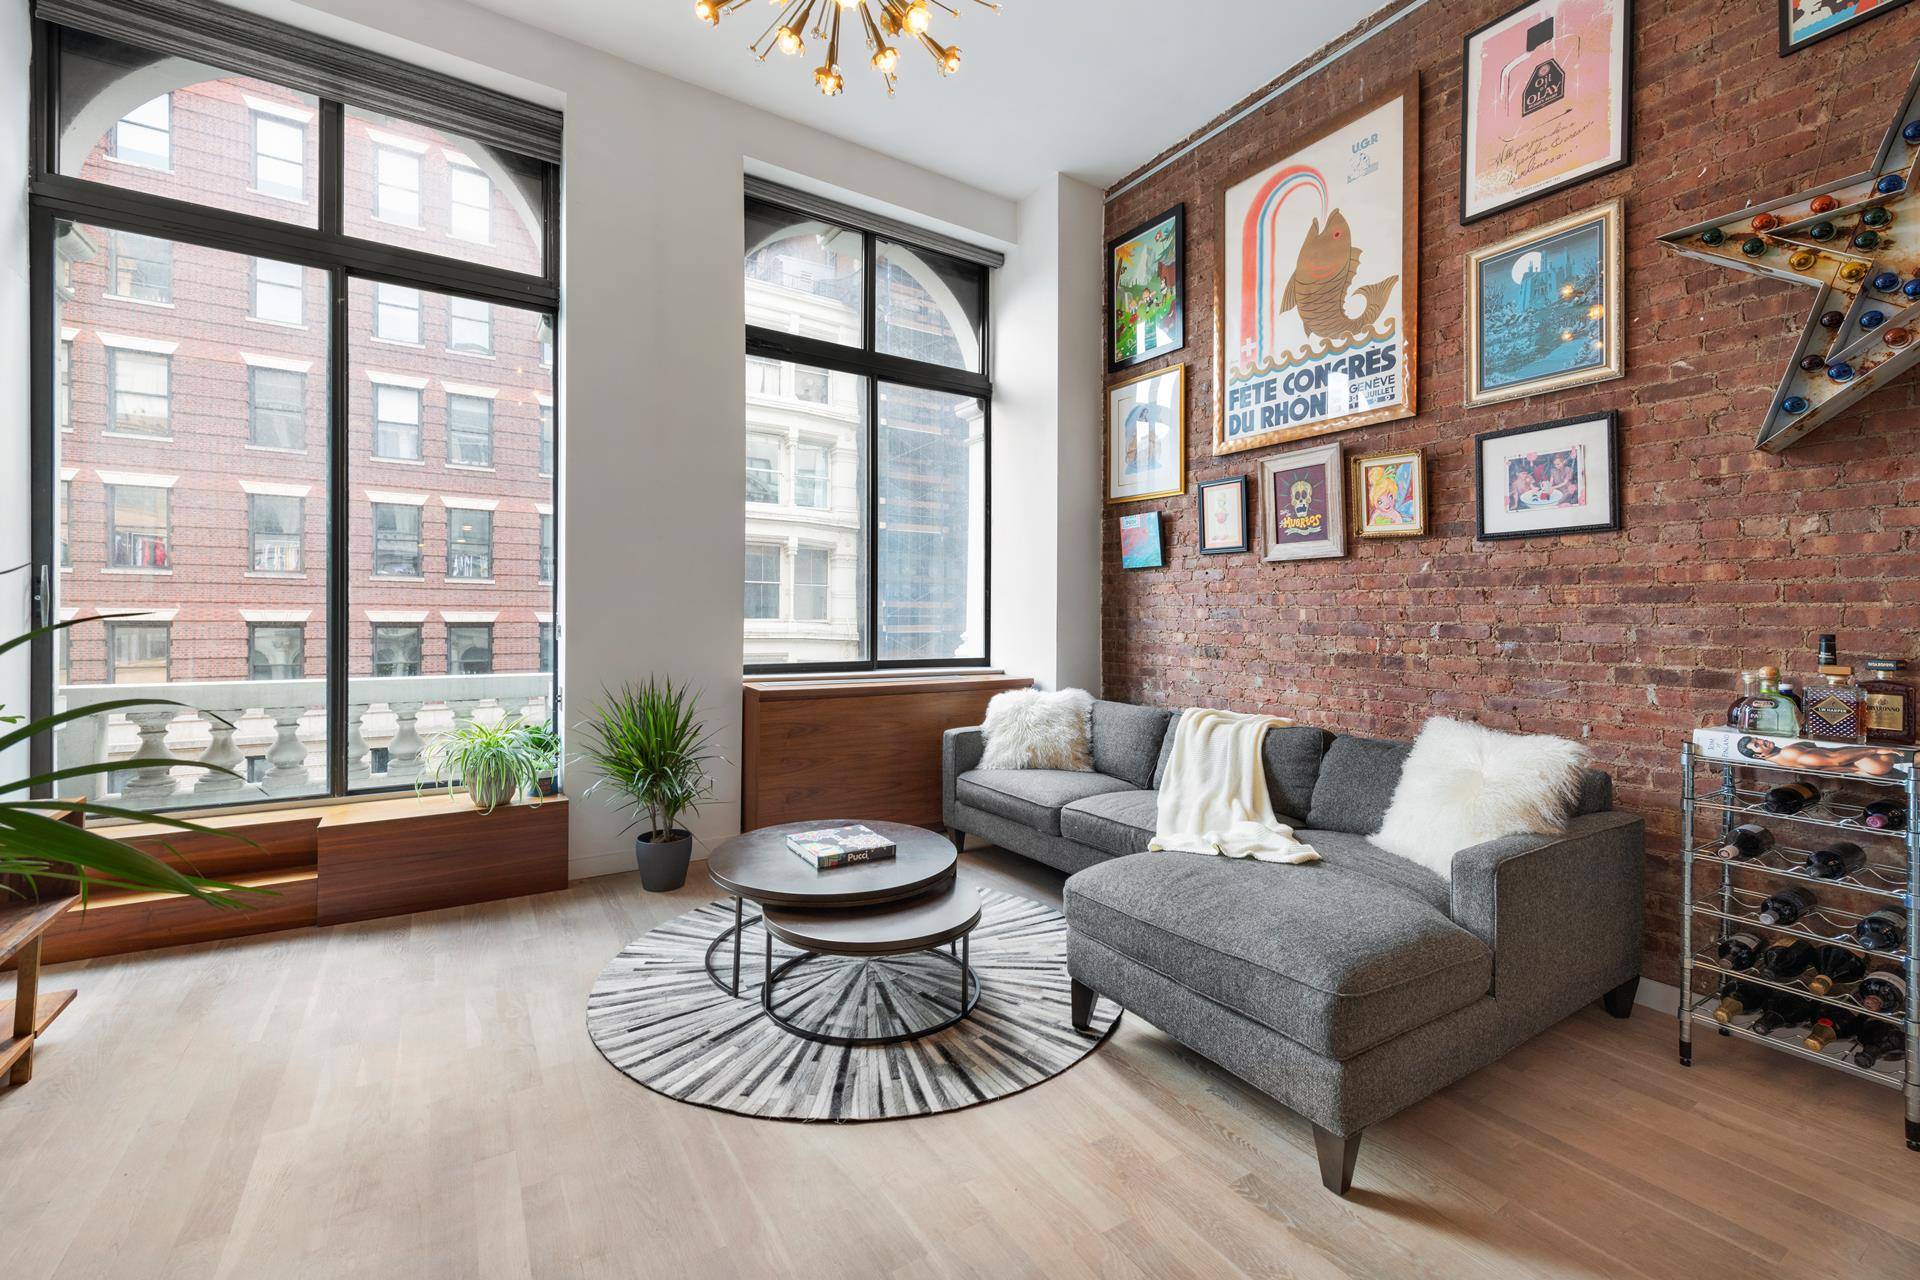 Located at 77 Bleecker Street in Manhattan's premier downtown building, this spacious one bedroom and one bathroom duplex loft residence includes elegant proportions, clever design, soaring 13' ceilings and a ...